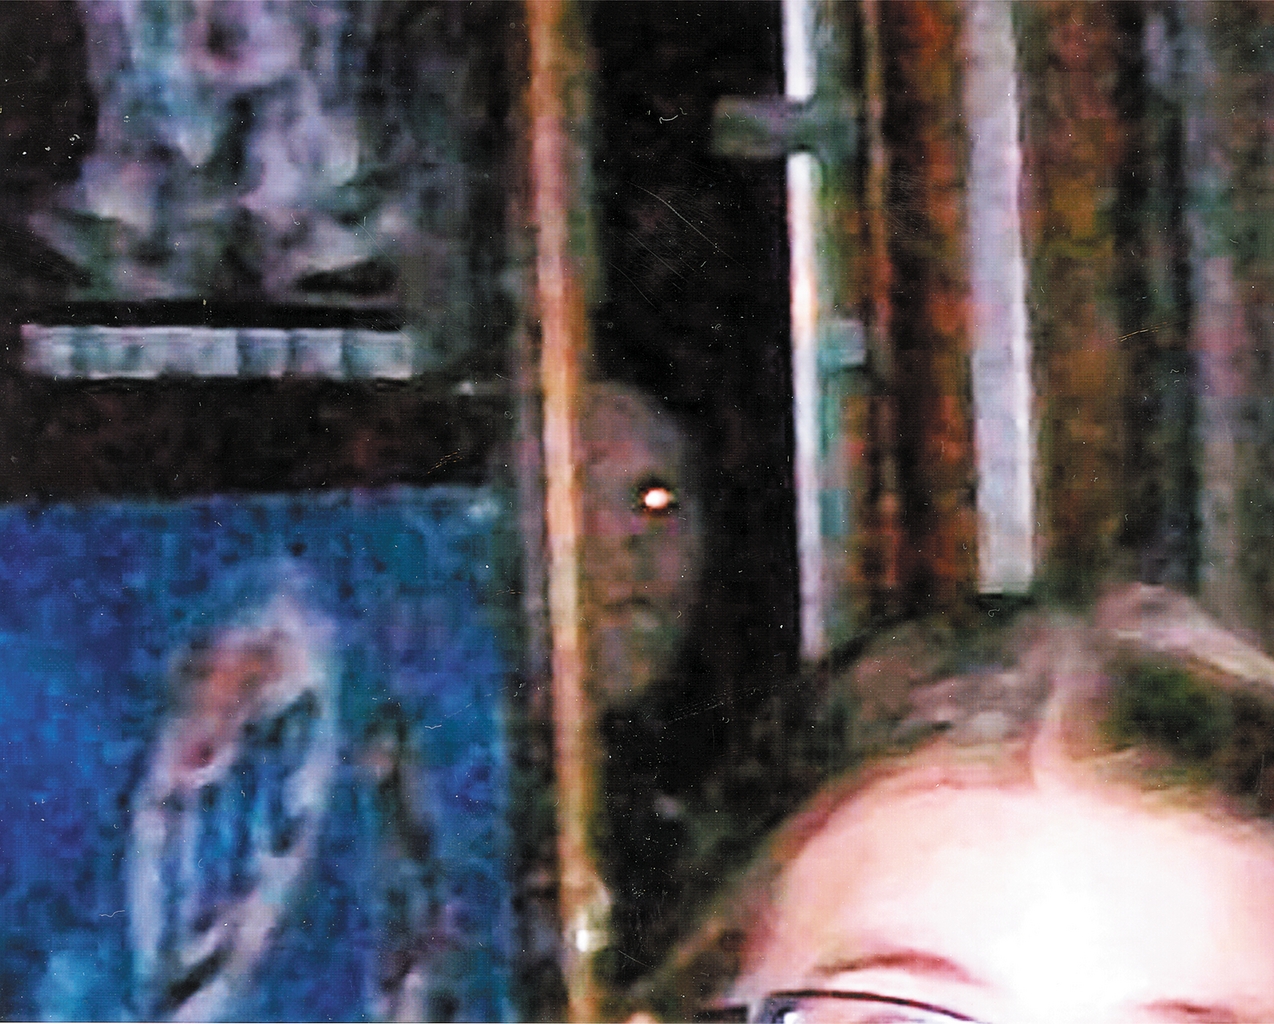 An enlargement of the photo better shows the ghostly face that appeared in the doorway of the Ely Bowling Alley. The apparition has prompted speculation that the building may be haunted.